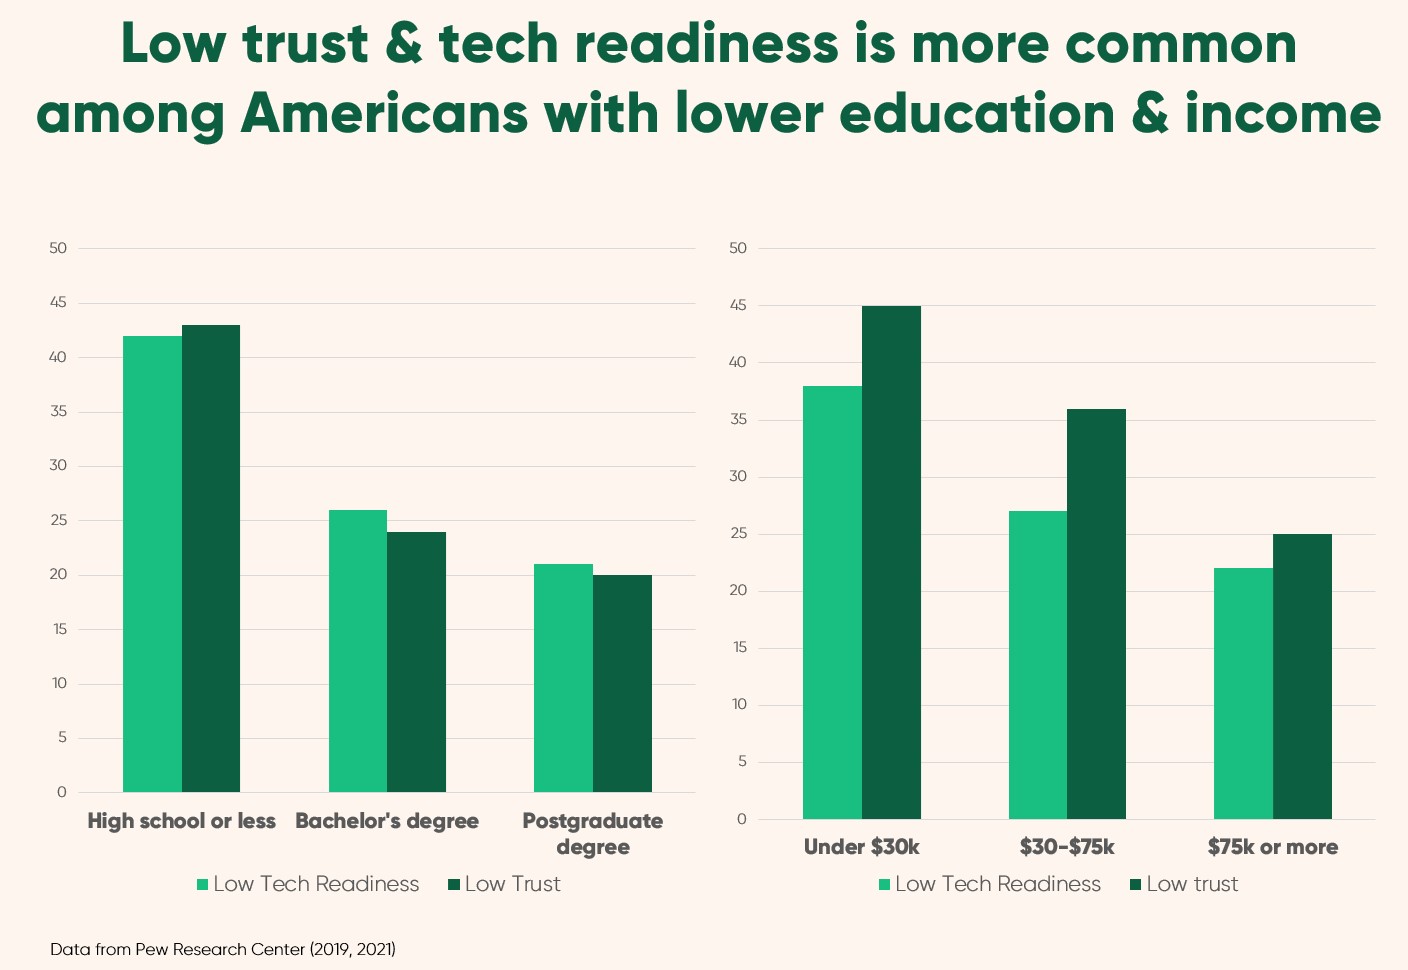 Low trust & low tech readiness are more common among Americans with lower education & income